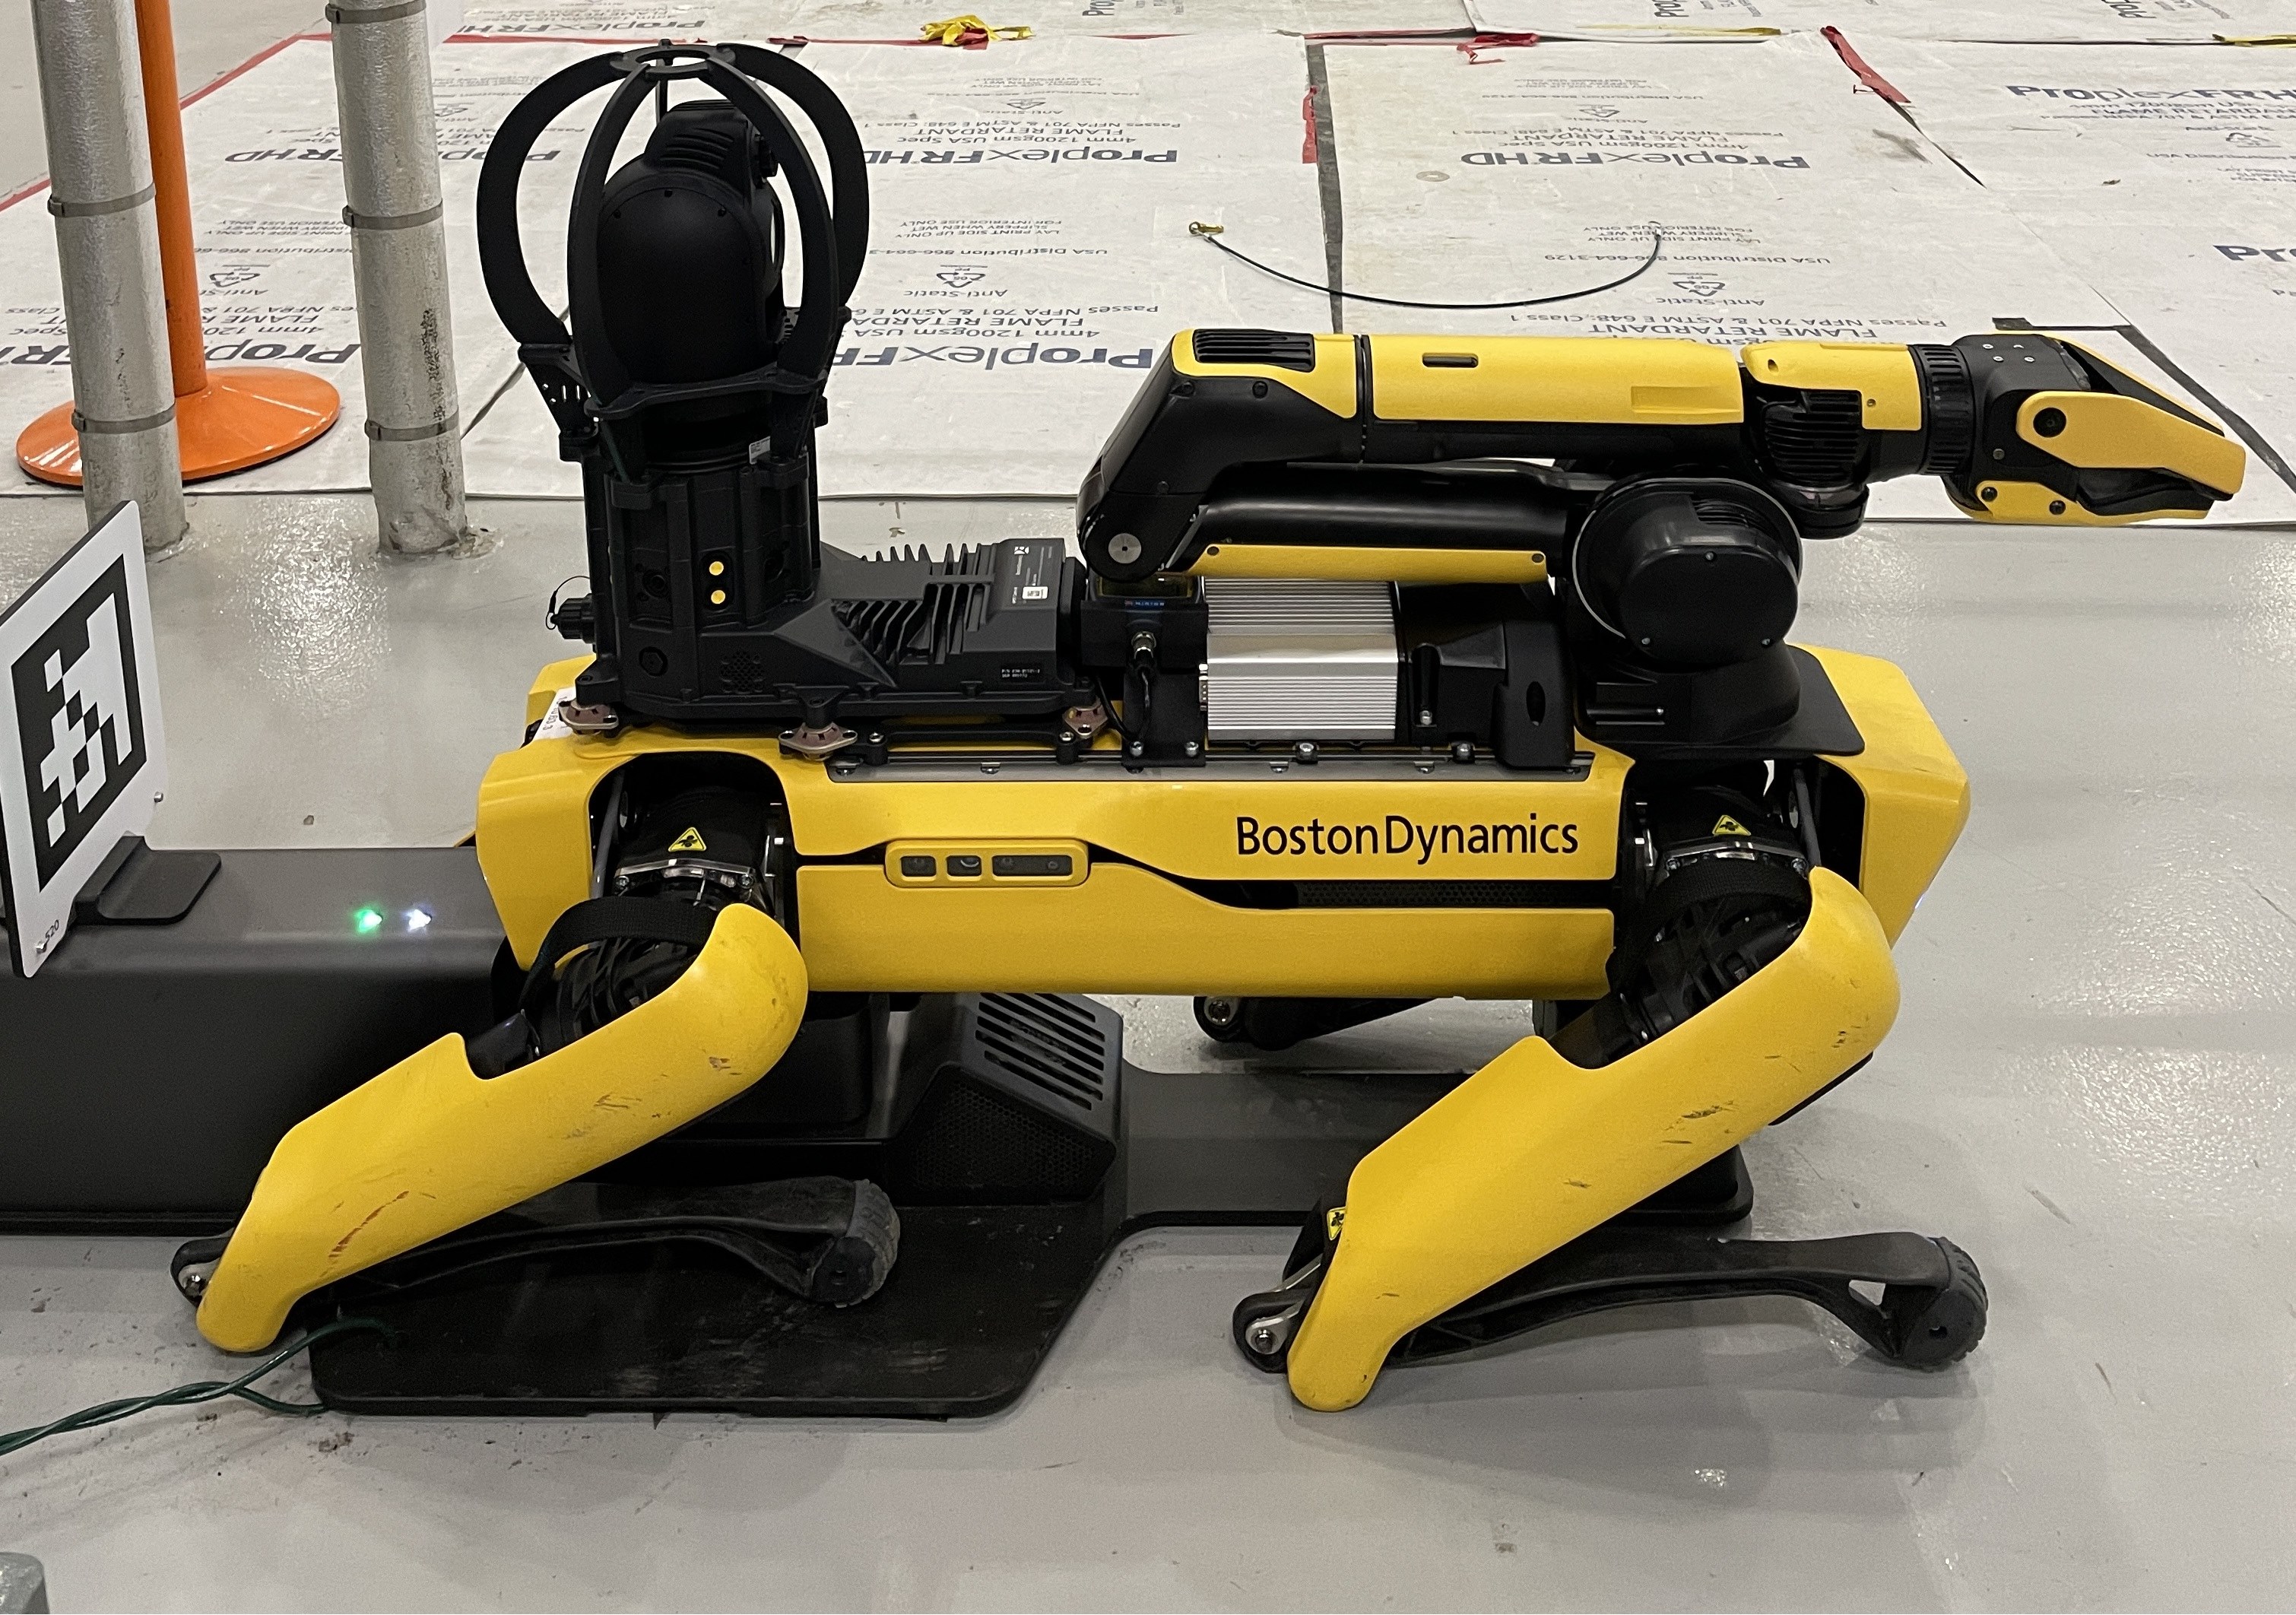 OPG has deployed several of Boston Dynamics' robot dog Spot to help out in many areas of operations.